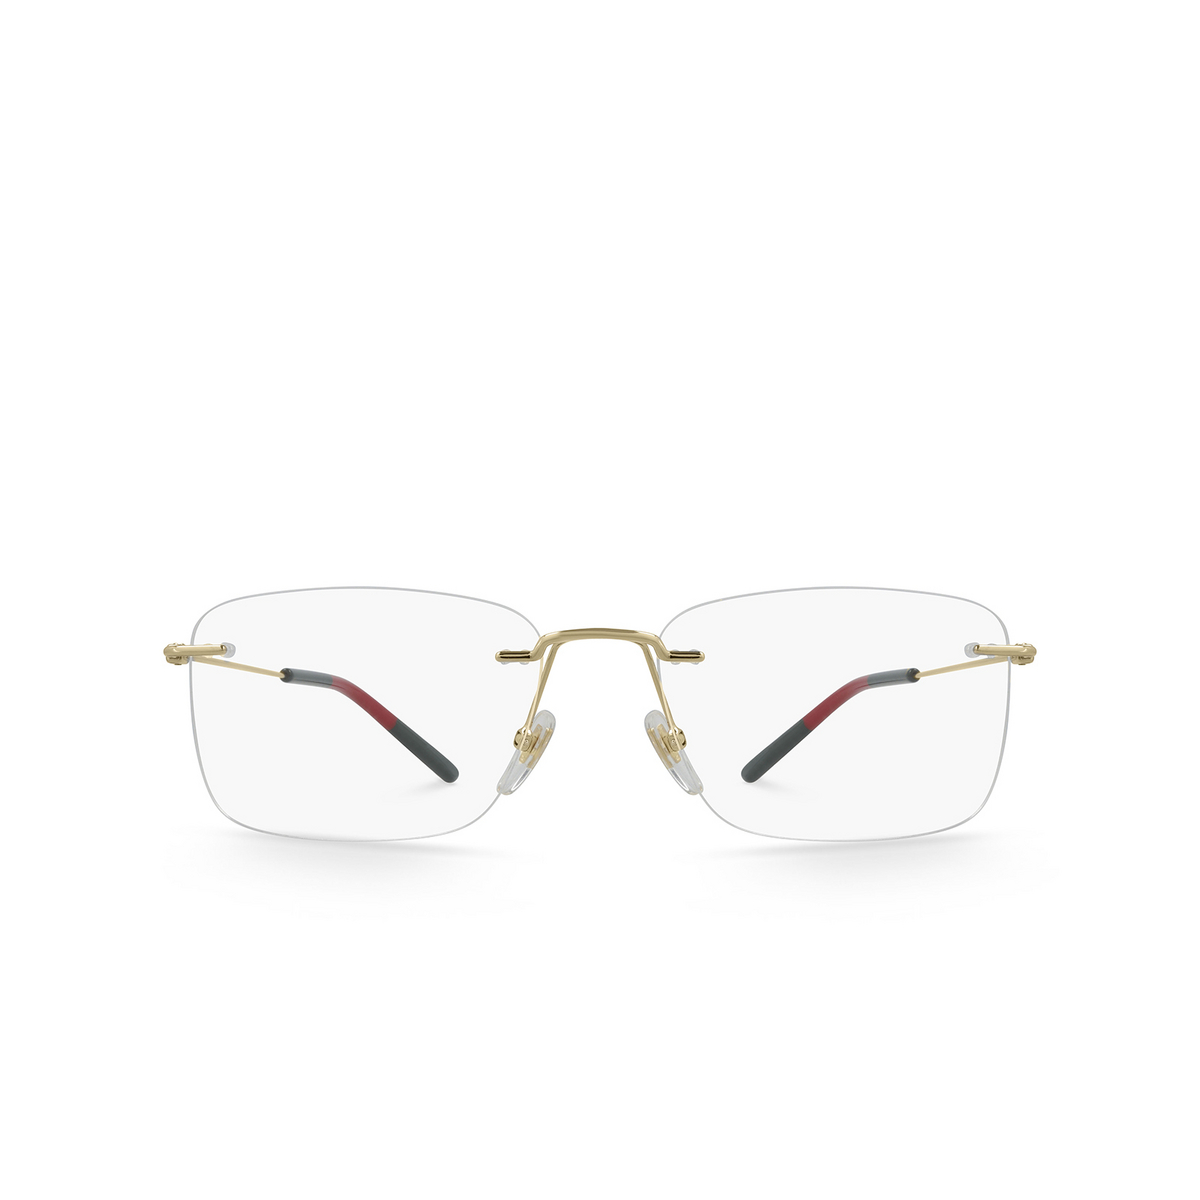 Gucci® Rectangle Eyeglasses: GG0399O color Gold 002 - front view.